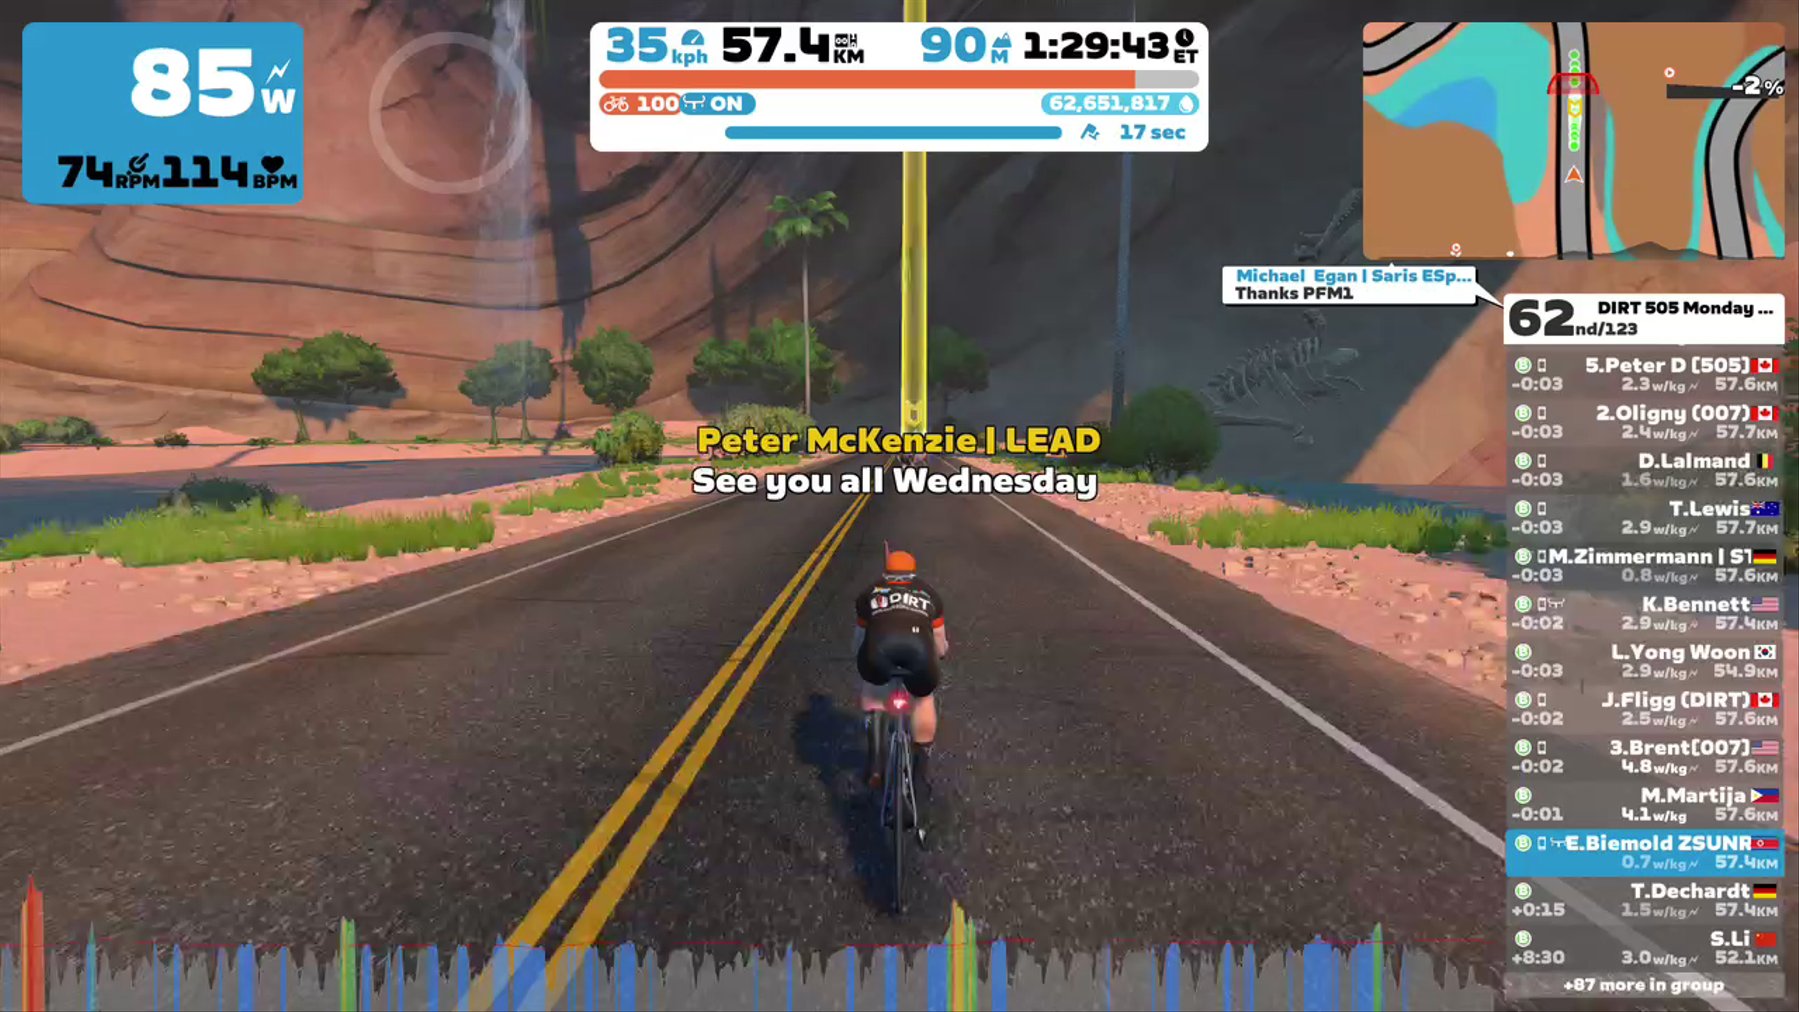 Zwift - Group Ride: DIRT 505 Monday Endurance Ride (B) on Tempus Fugit in Watopia